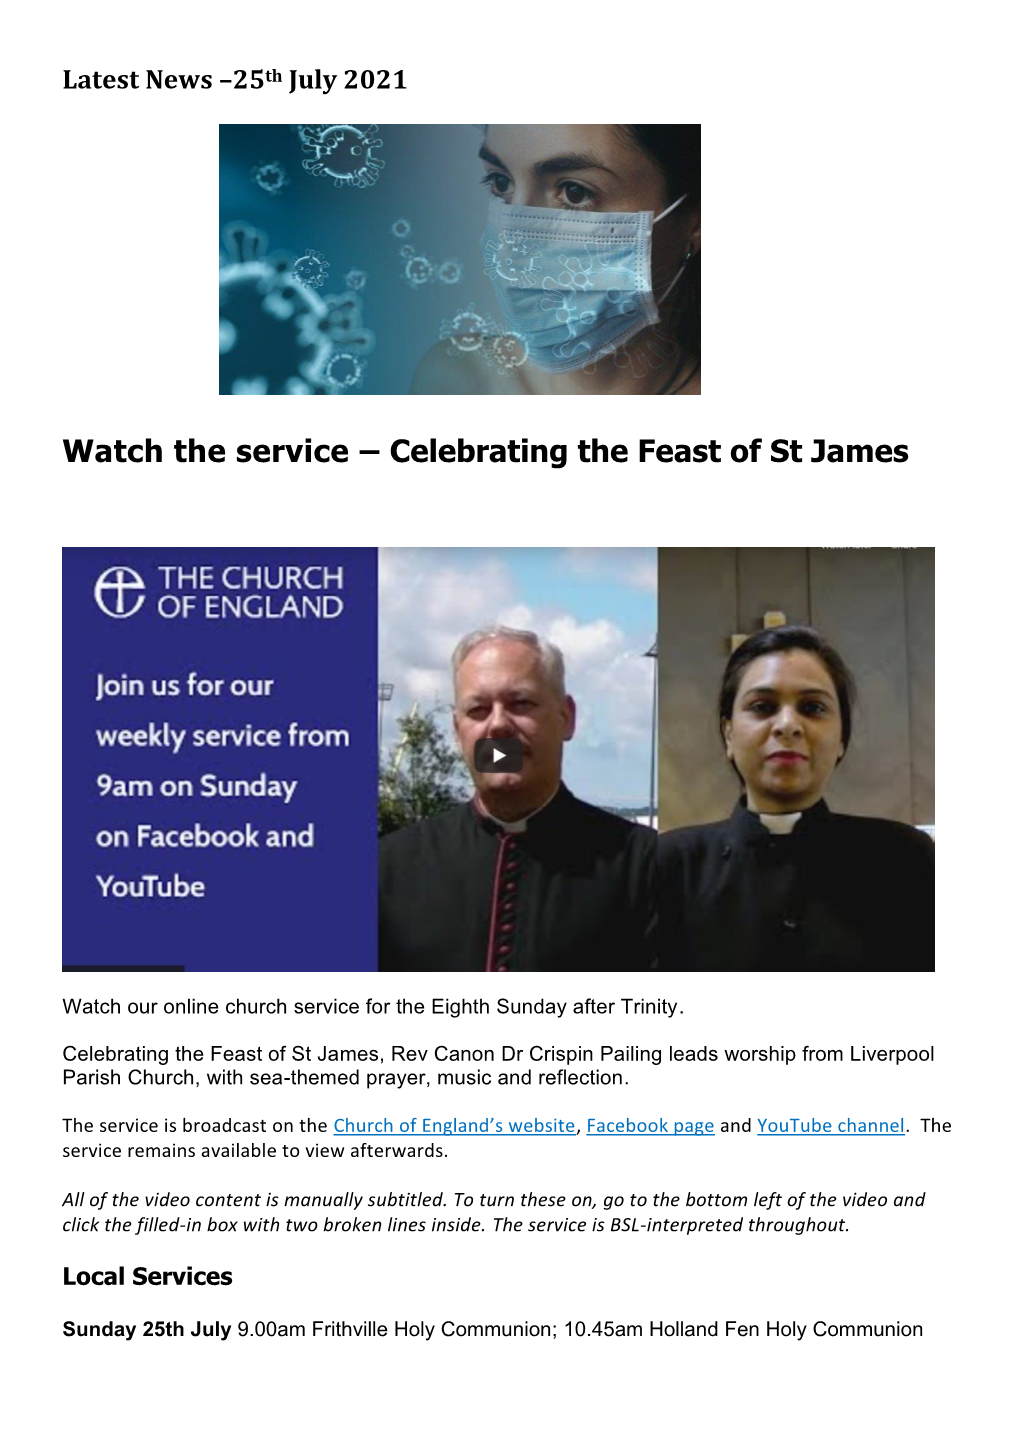 Watch the Service – Celebrating the Feast of St James